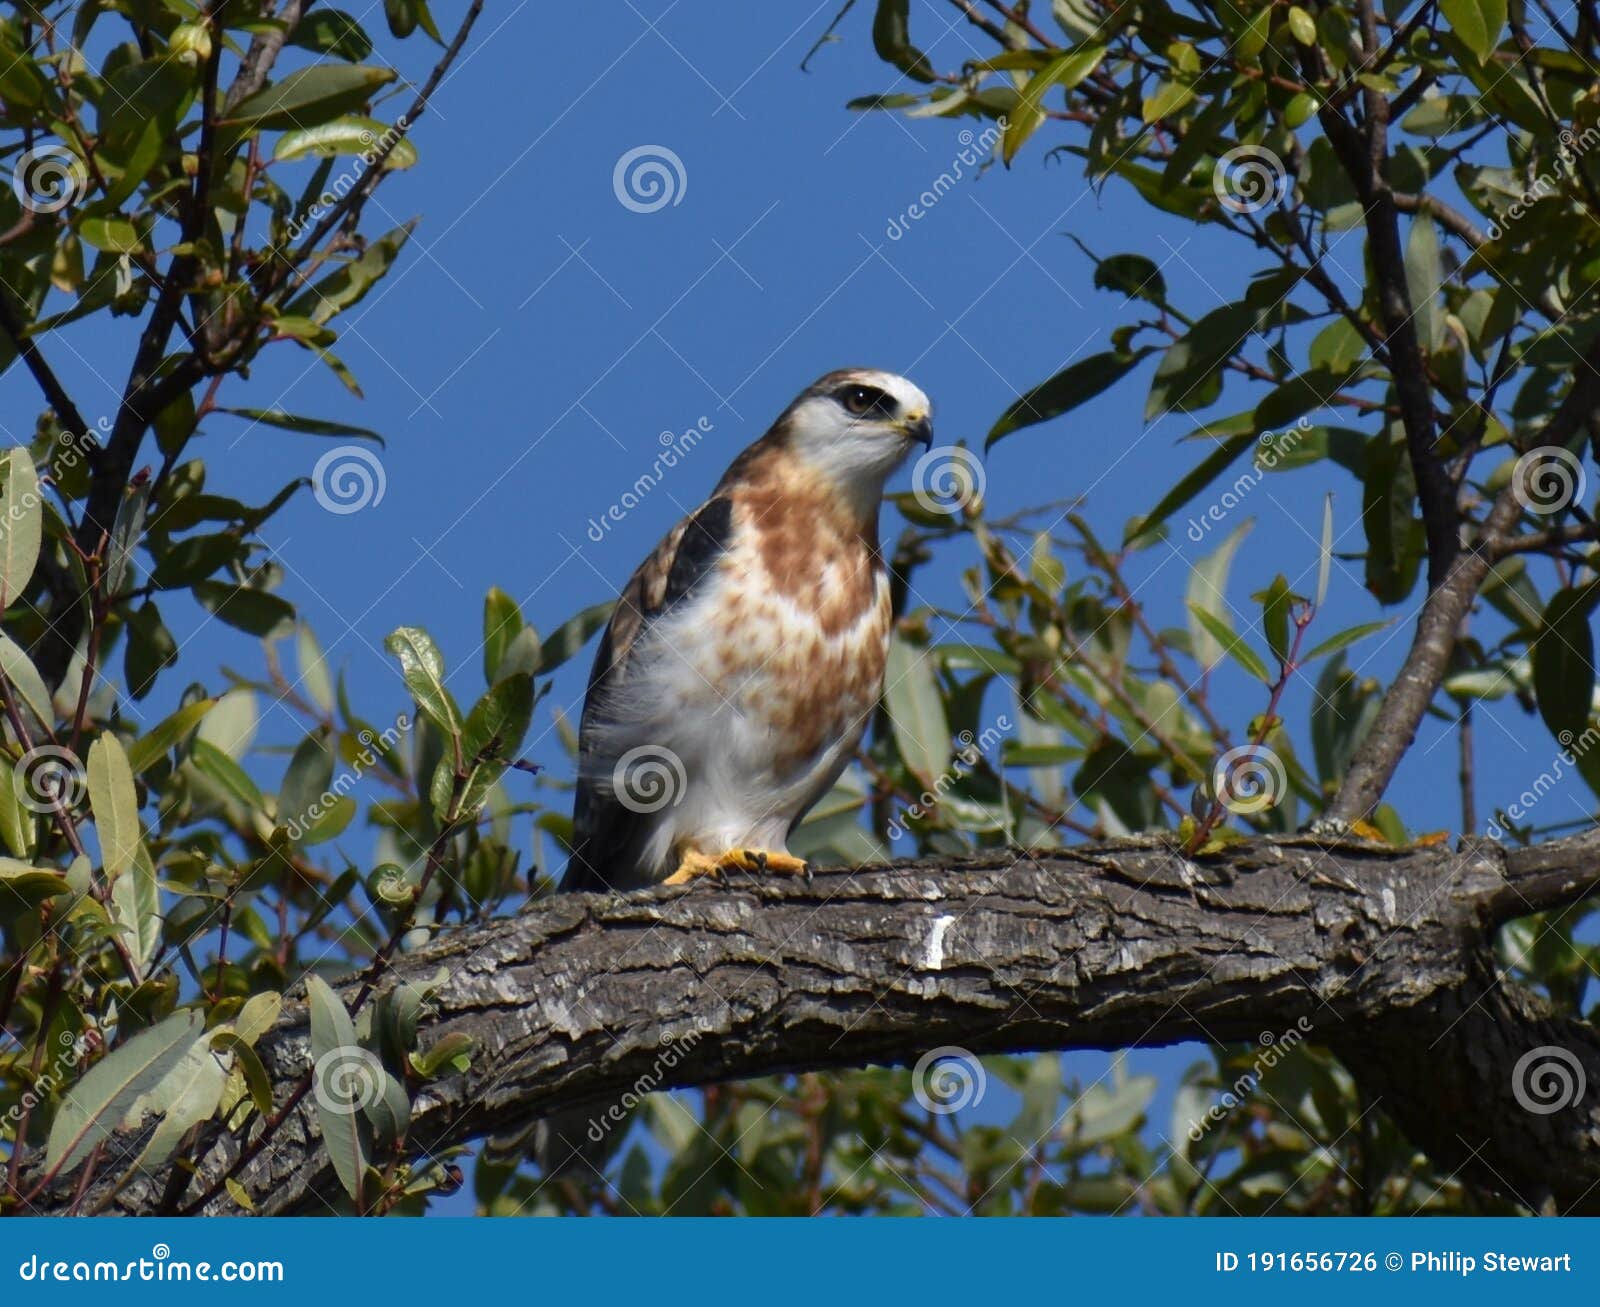 A Juvenile White-tailed Kite on Tree Branch Stock Photo - Image of ...